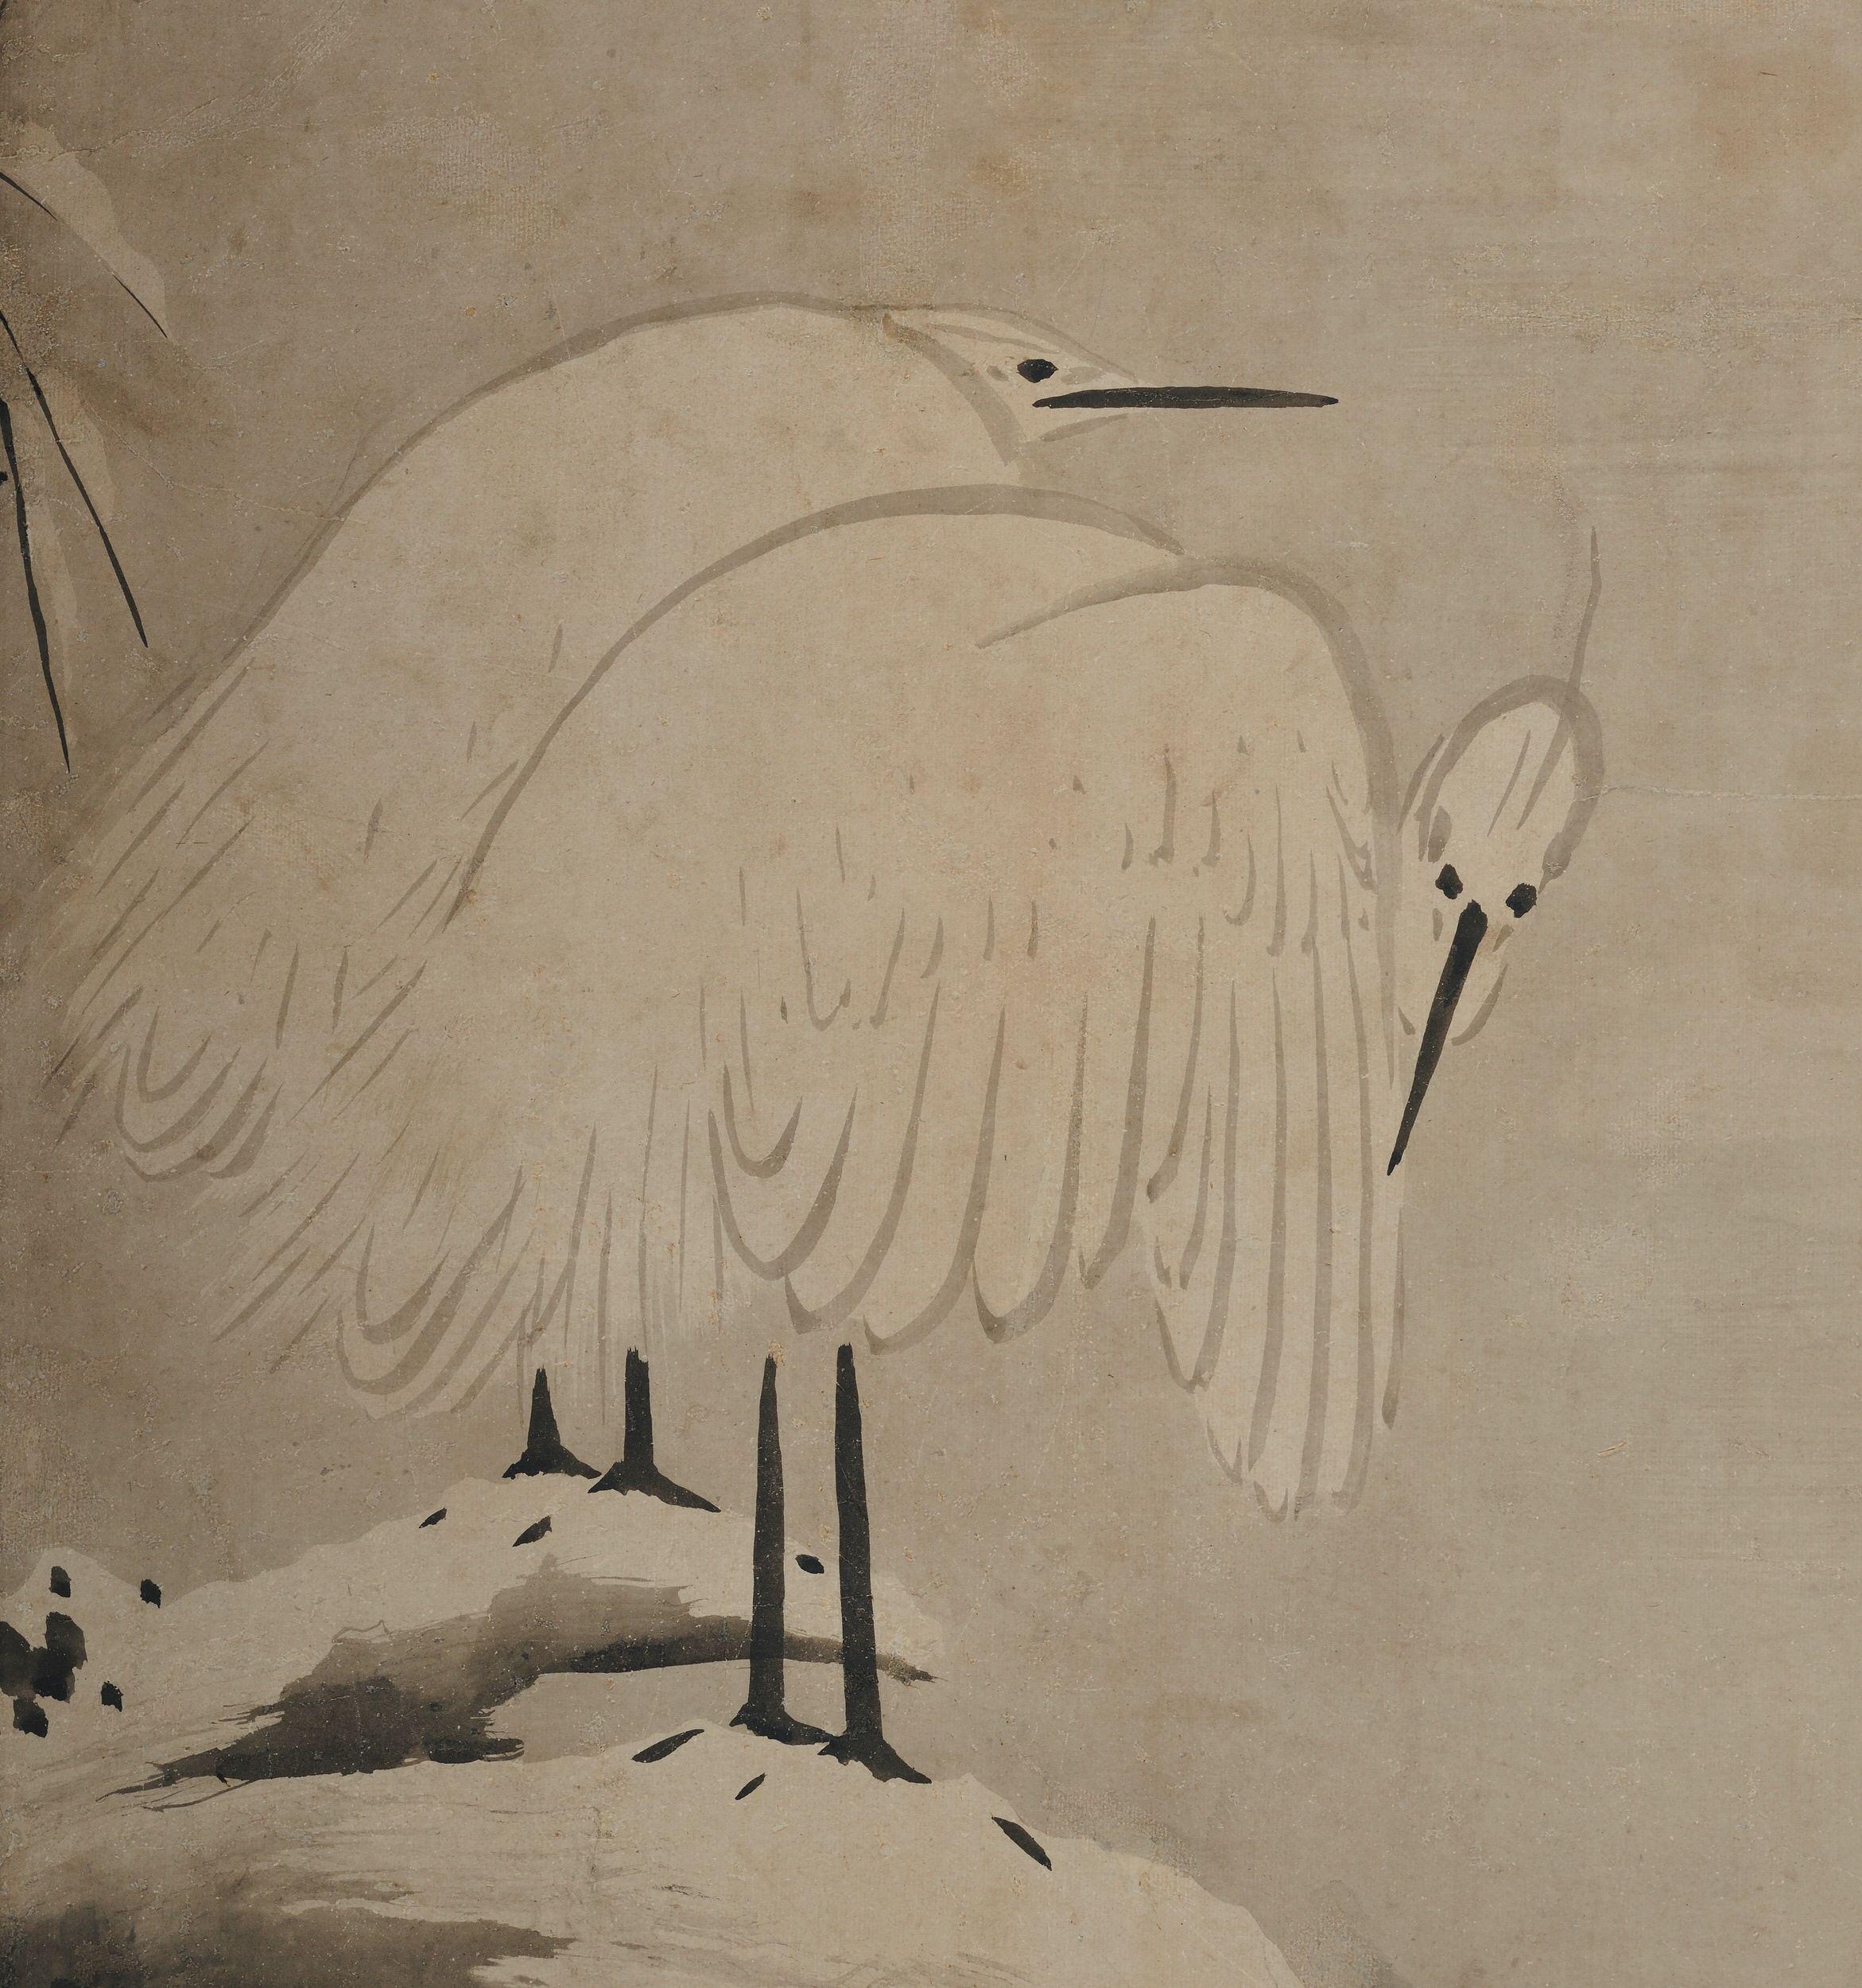 Kano Sansetsu (1589-1651)

White herons in snow

Edo period, circa 1640

Framed painting. Ink on paper.

Kano Sansetsu is a Japanese painter who represented the Kyo Kano (Kyoto Kano) school from the end of Momoyama to the early Edo period.